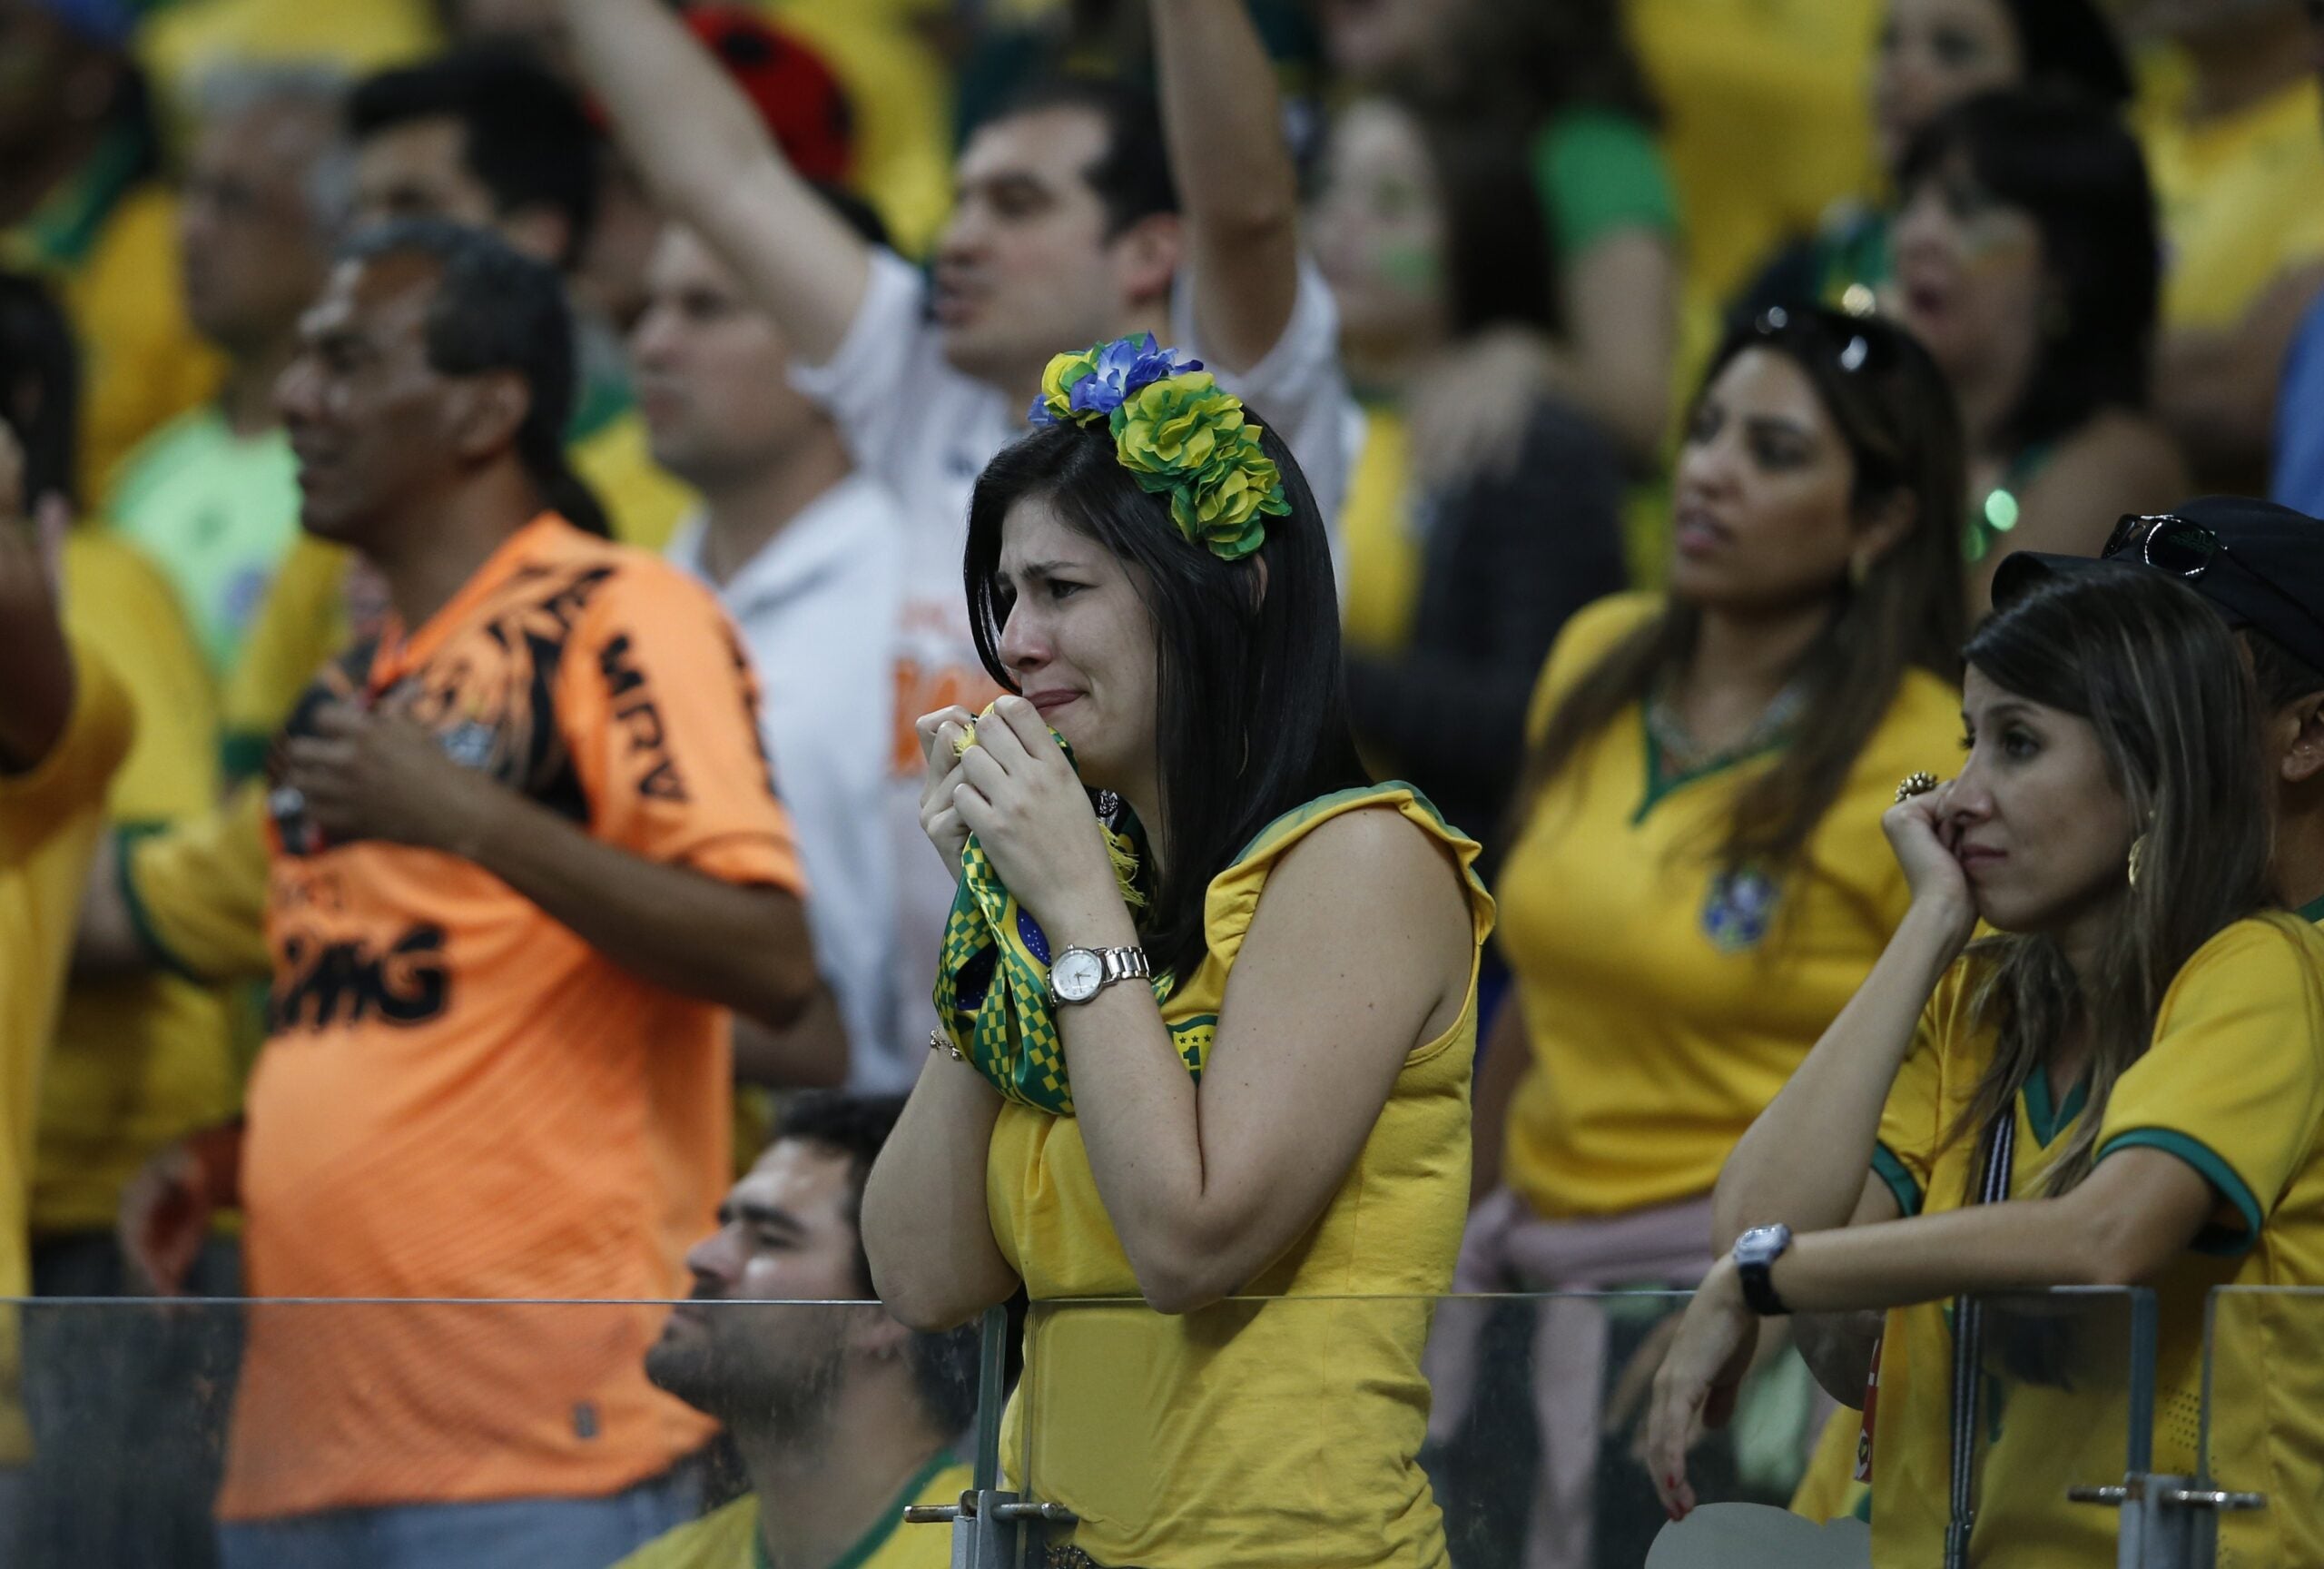 World Cup 2014: Germany Defeats Brazil, 7-1 - The New York Times